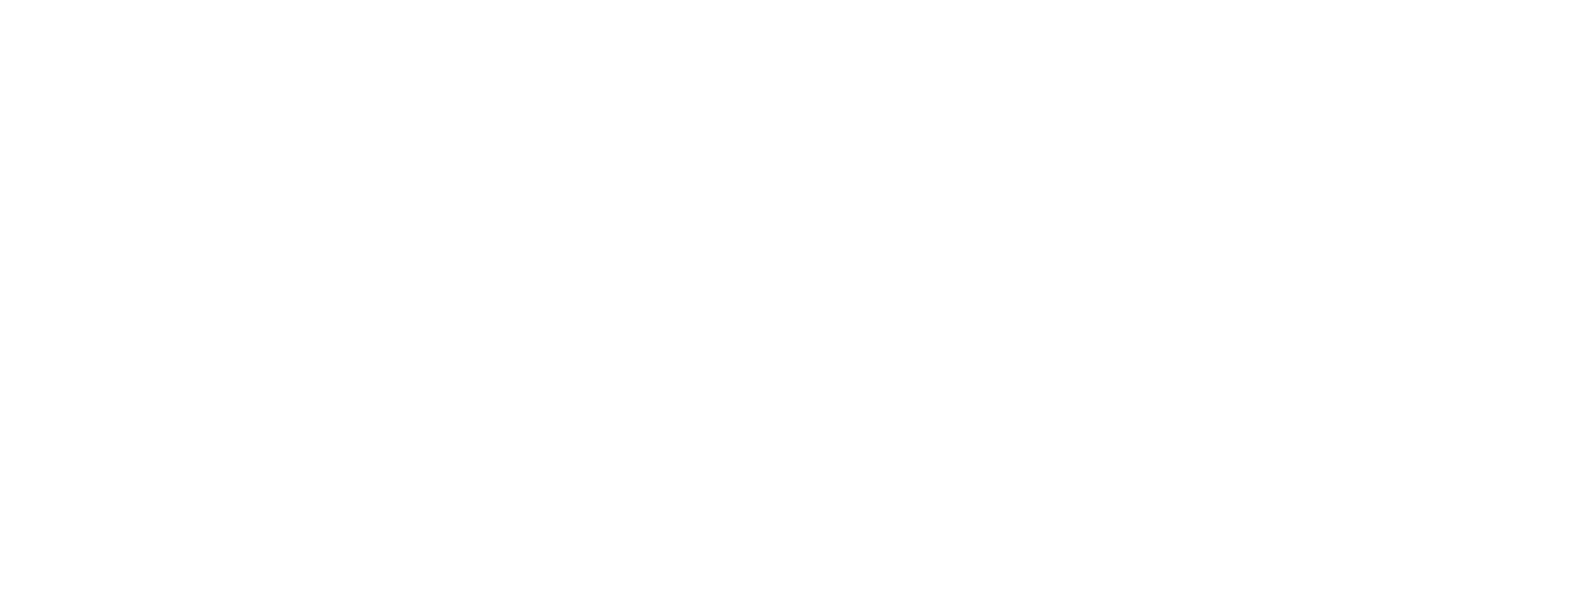 Rayonier logo large for dark backgrounds (transparent PNG)